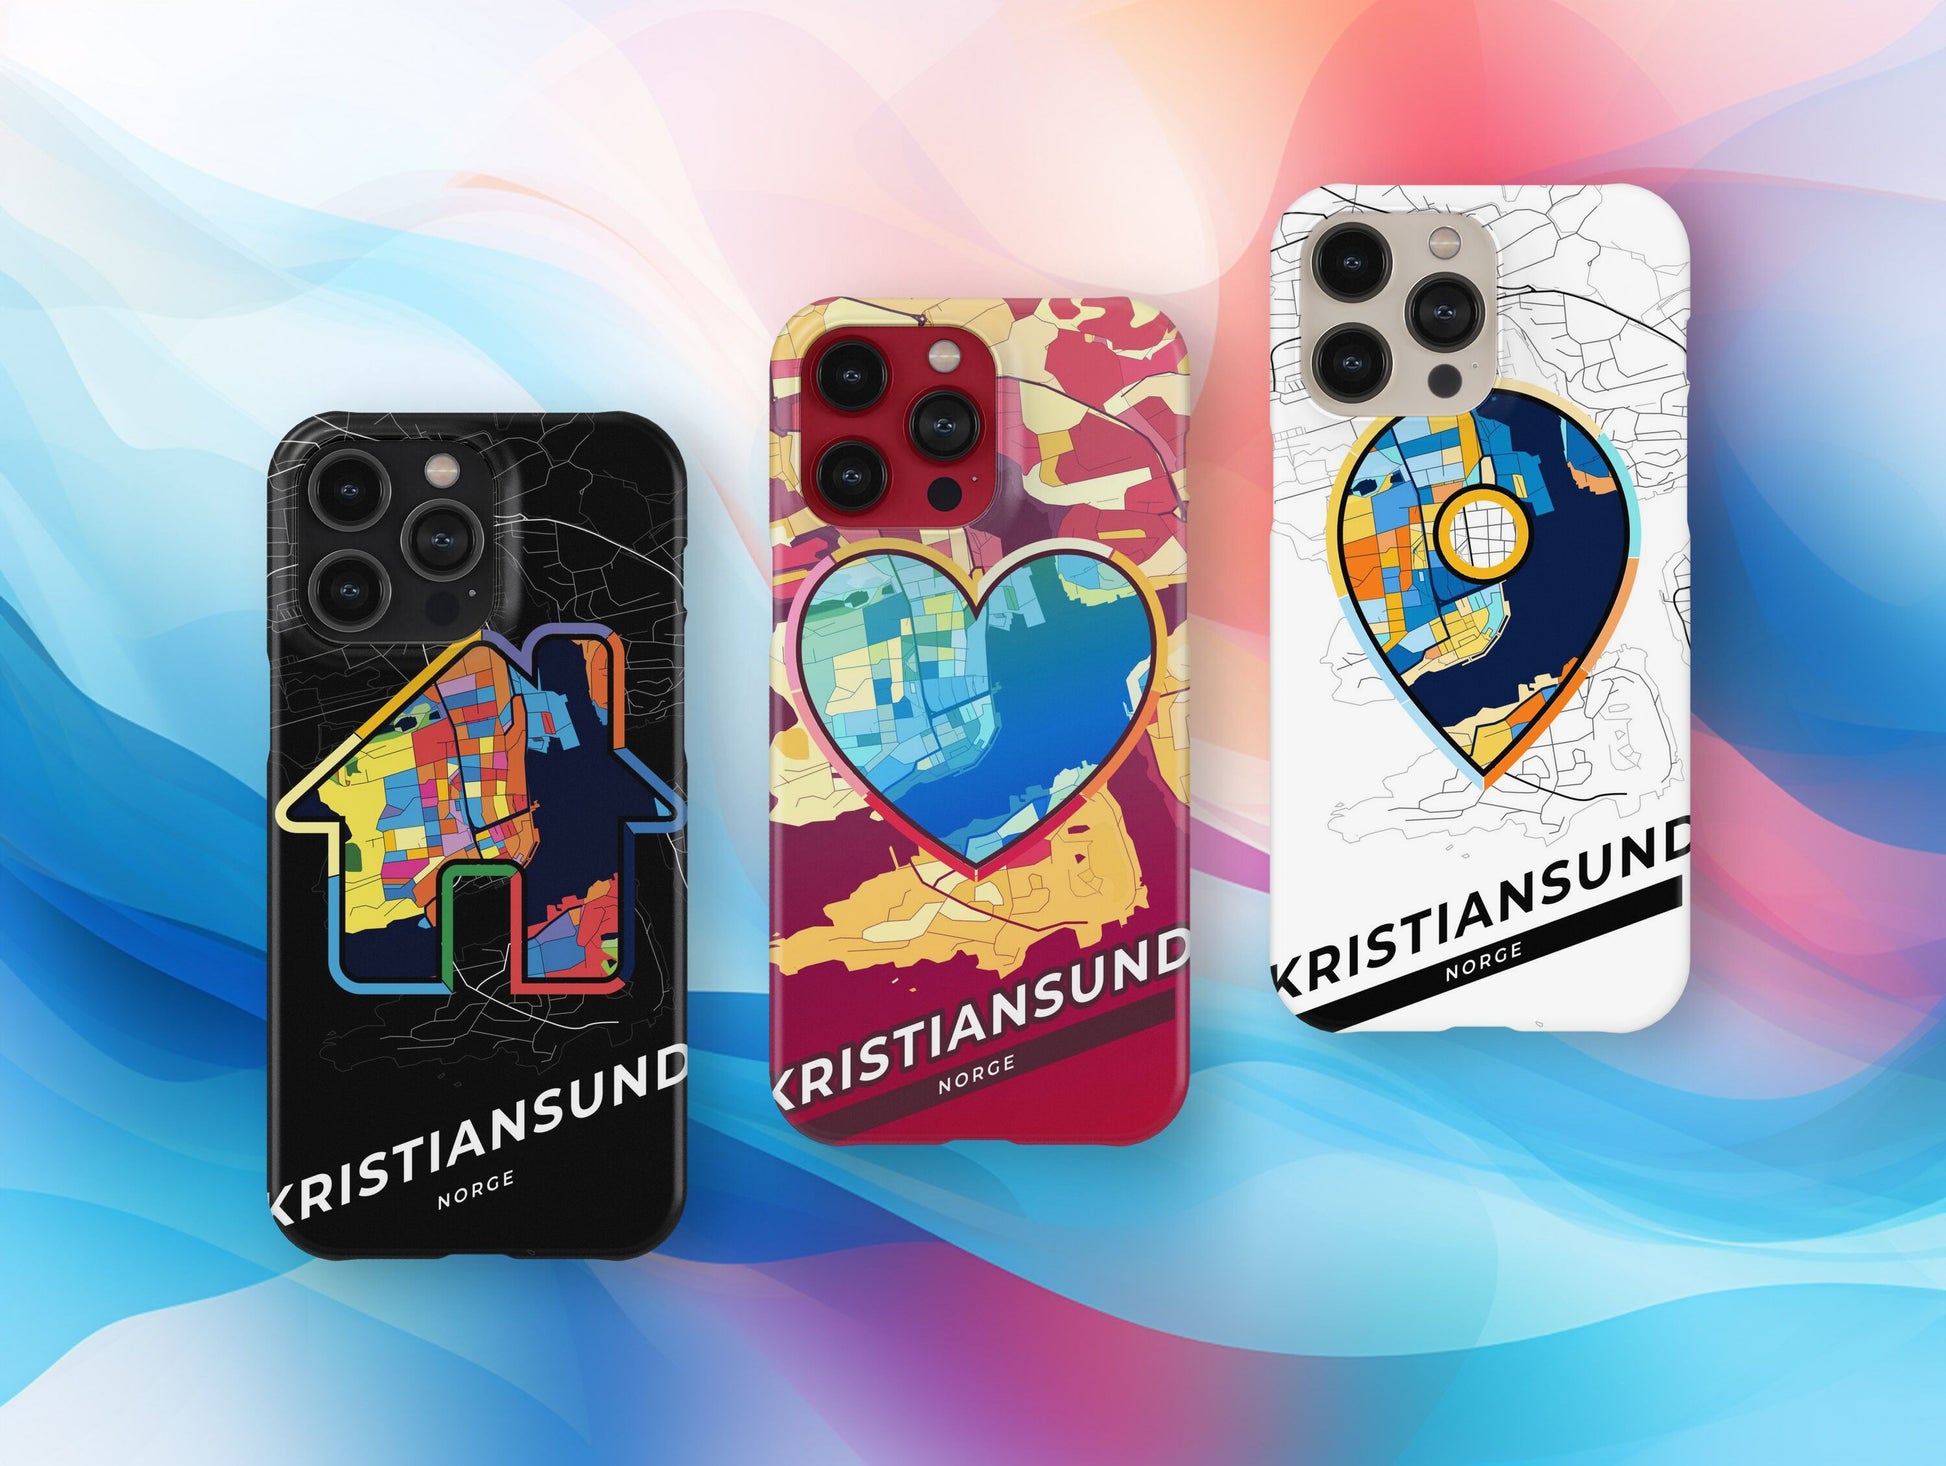 Kristiansund Norway slim phone case with colorful icon. Birthday, wedding or housewarming gift. Couple match cases.